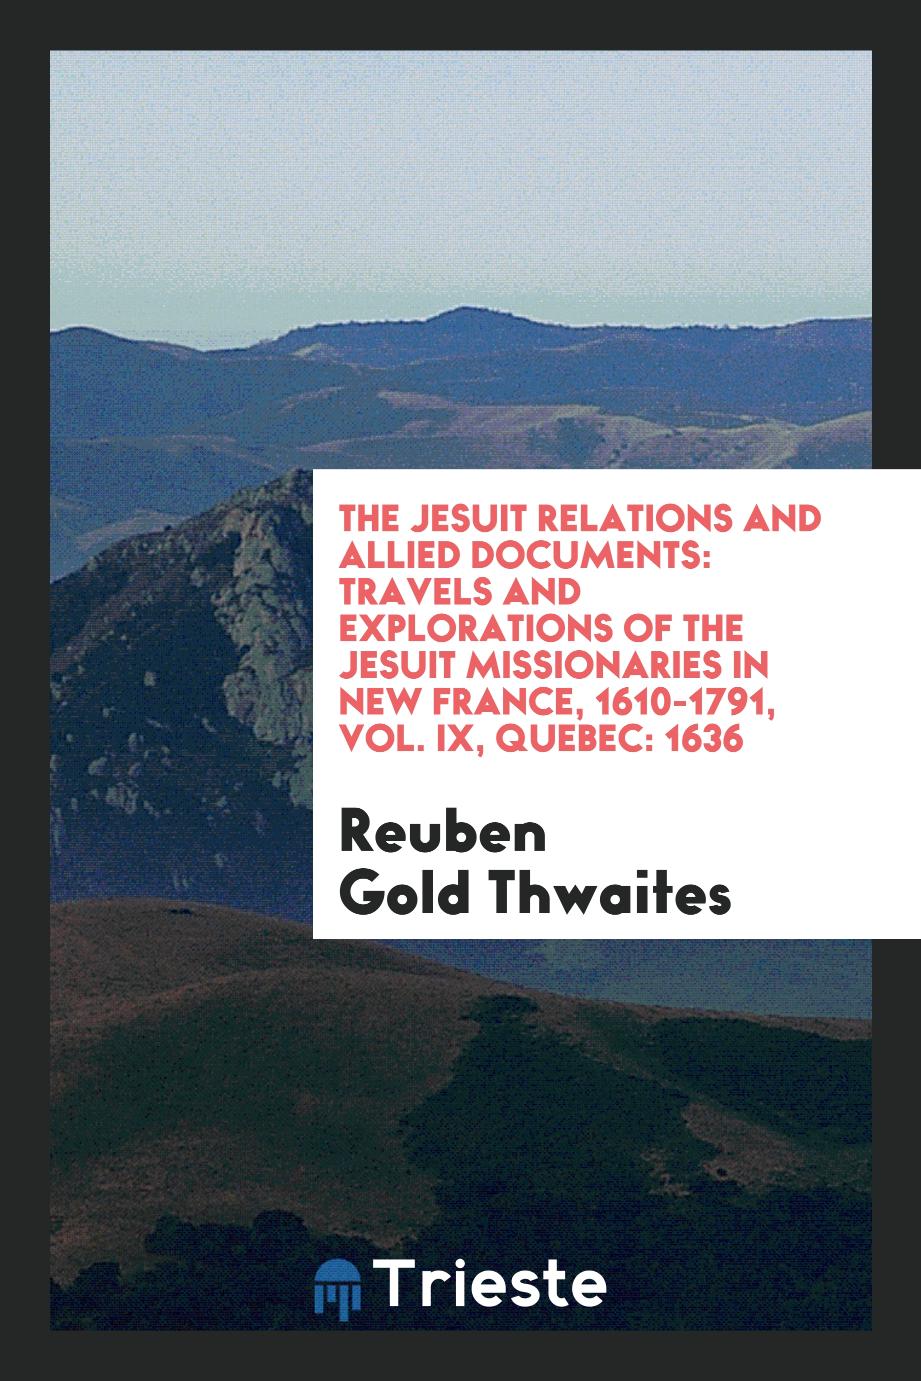 The Jesuit Relations and Allied Documents: Travels and Explorations of the Jesuit Missionaries in New France, 1610-1791, Vol. IX, Quebec: 1636